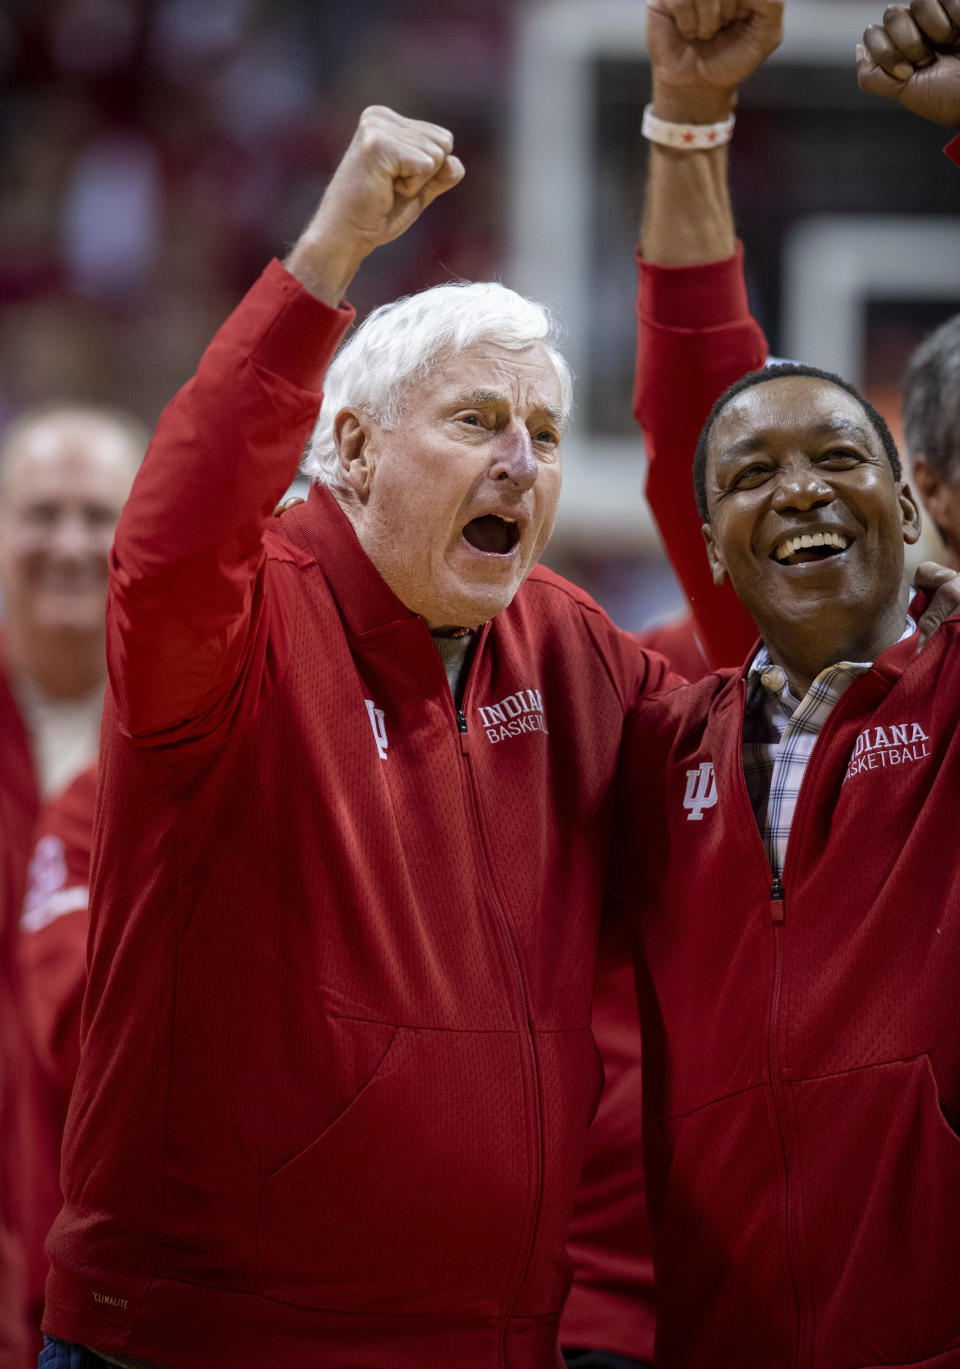 Former Indiana basketball head coach Bobby Knight, left, yells "play defense!" for the fans during his first appearance at Indiana University since his dismissal in September of 2000. Knight, along with former player Isiah Thomas, right, are on the court during a ceremony with the Indiana players of the 1980 Big Ten championship team the halftime of an NCAA college basketball game, Saturday, Feb. 8, 2020, in Bloomington, Ind. (AP Photo/Doug McSchooler)